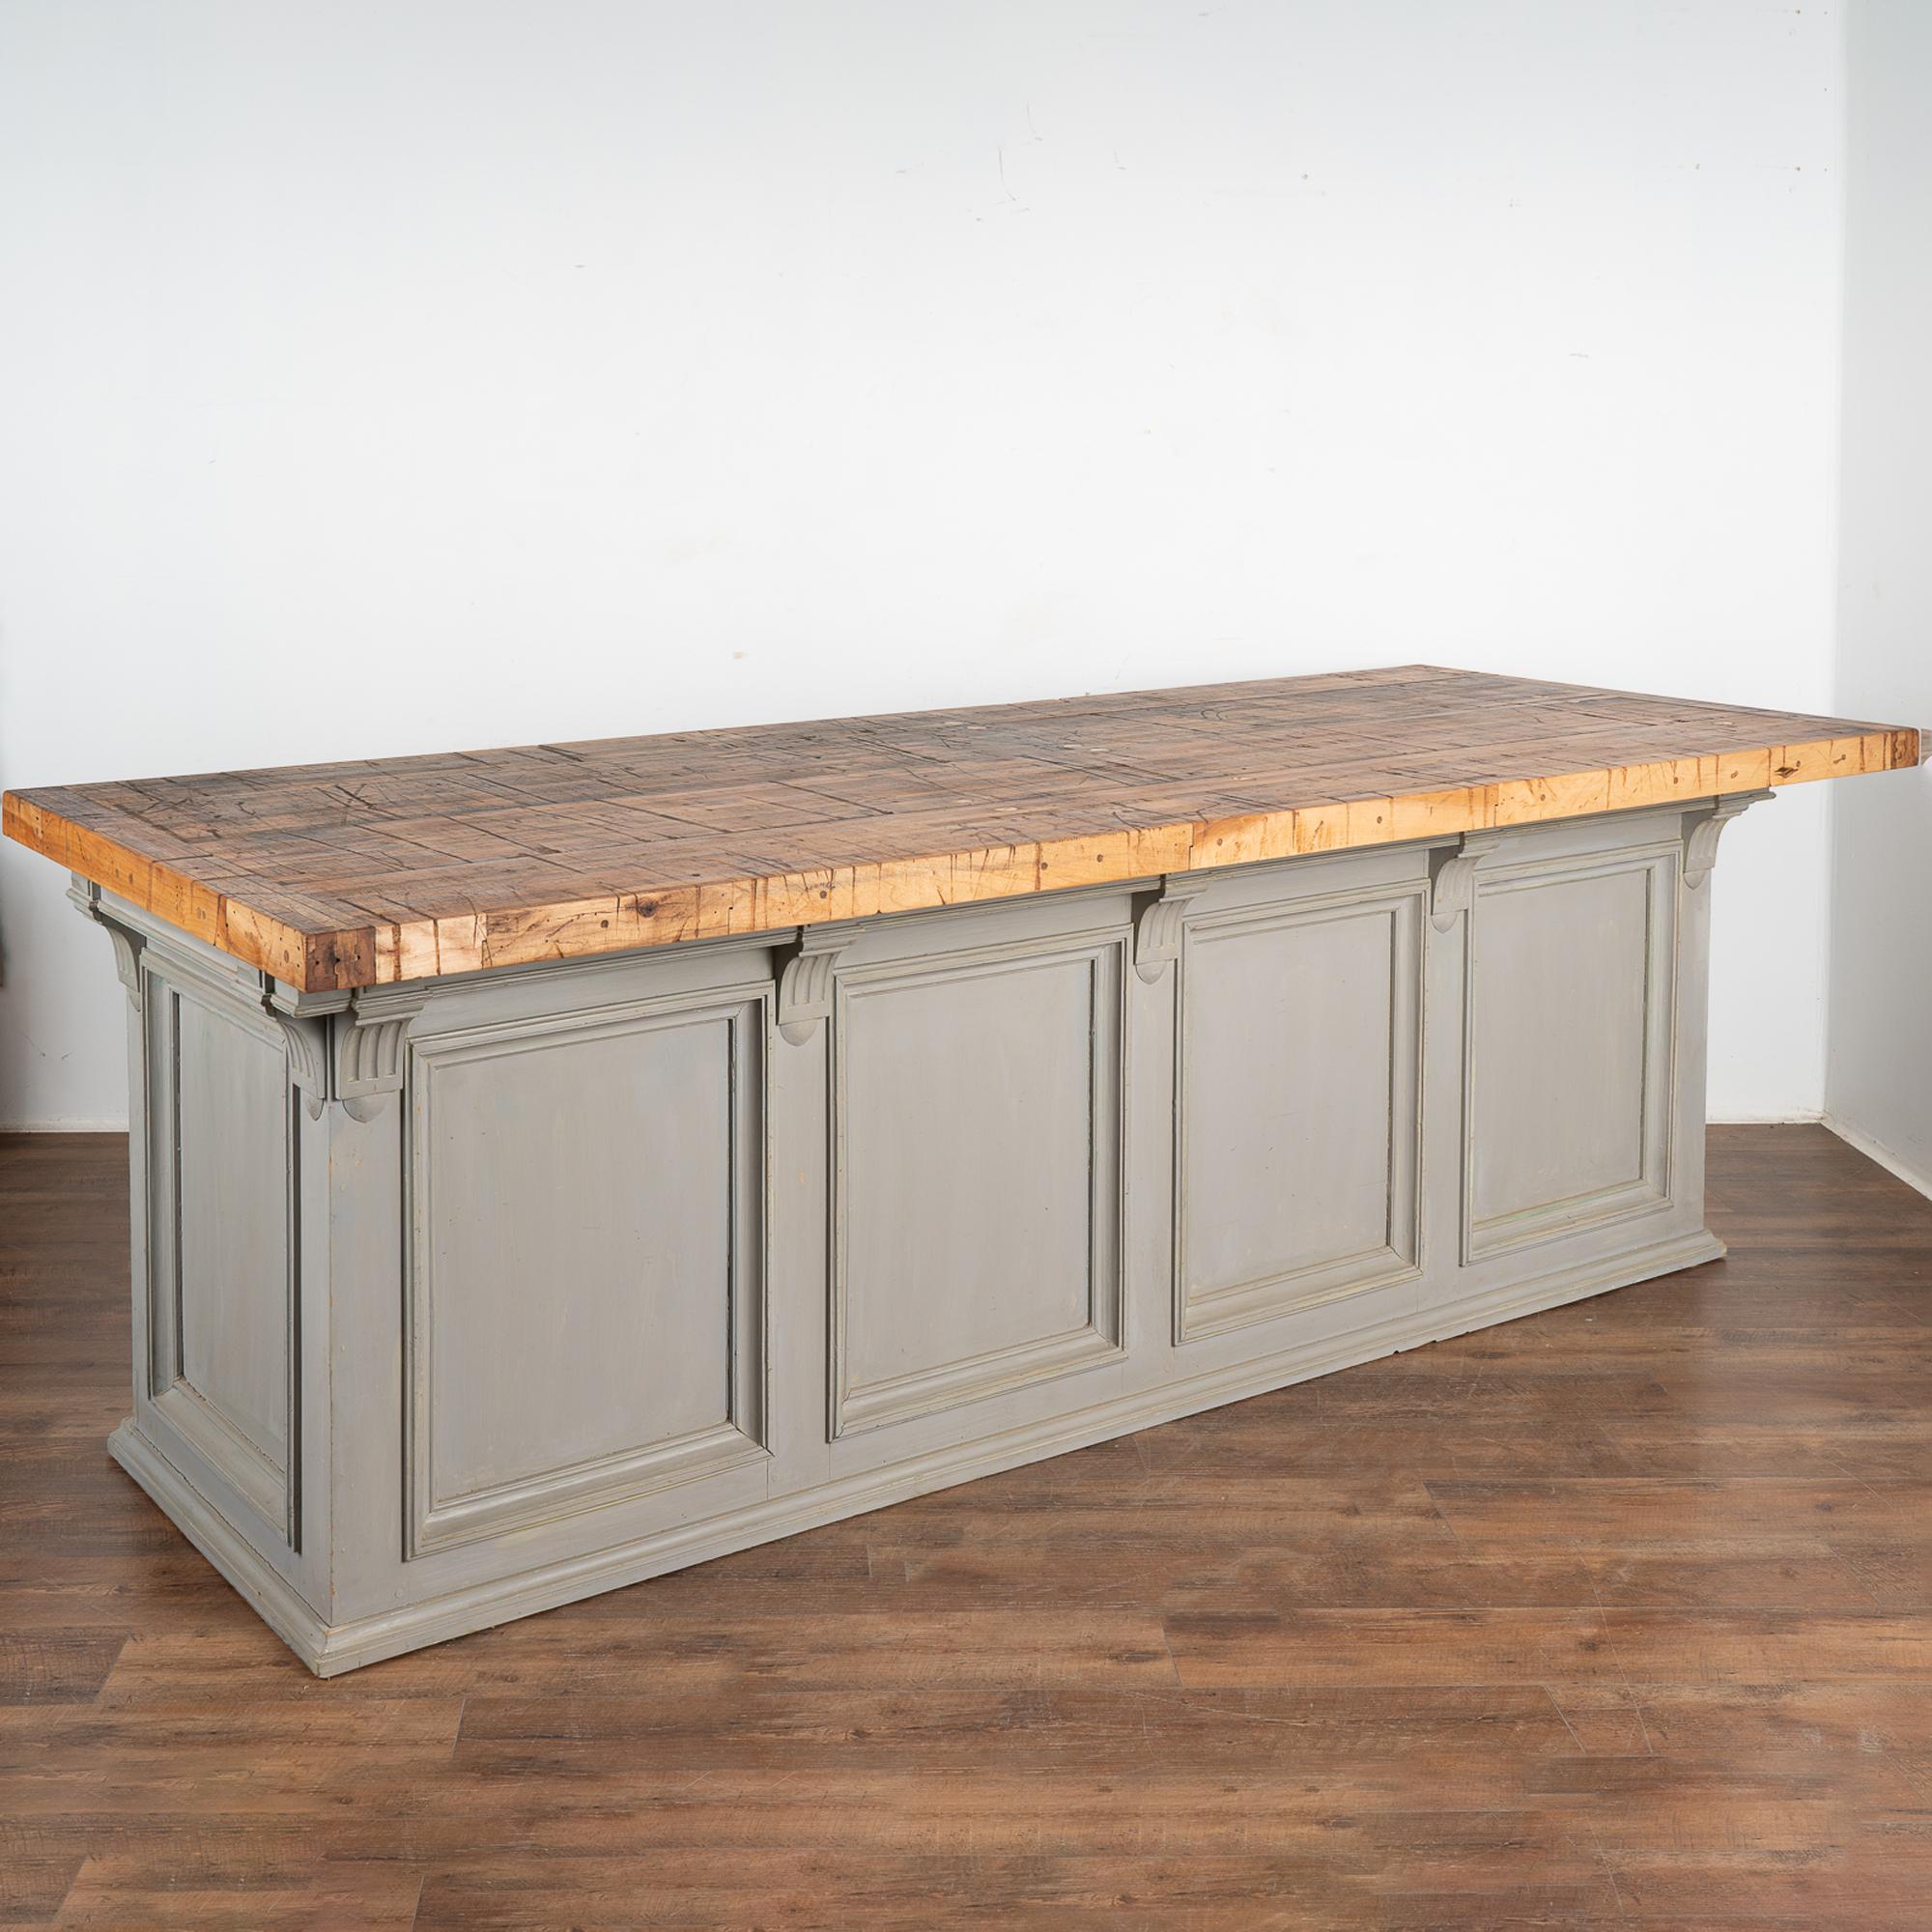 This old shop counter from France has been given new life with a custom professional gray painted finish creating a fresh look for a modern kitchen island.
The top is made from old boxcar flooring (from a train); thick and heavy, it is filled with